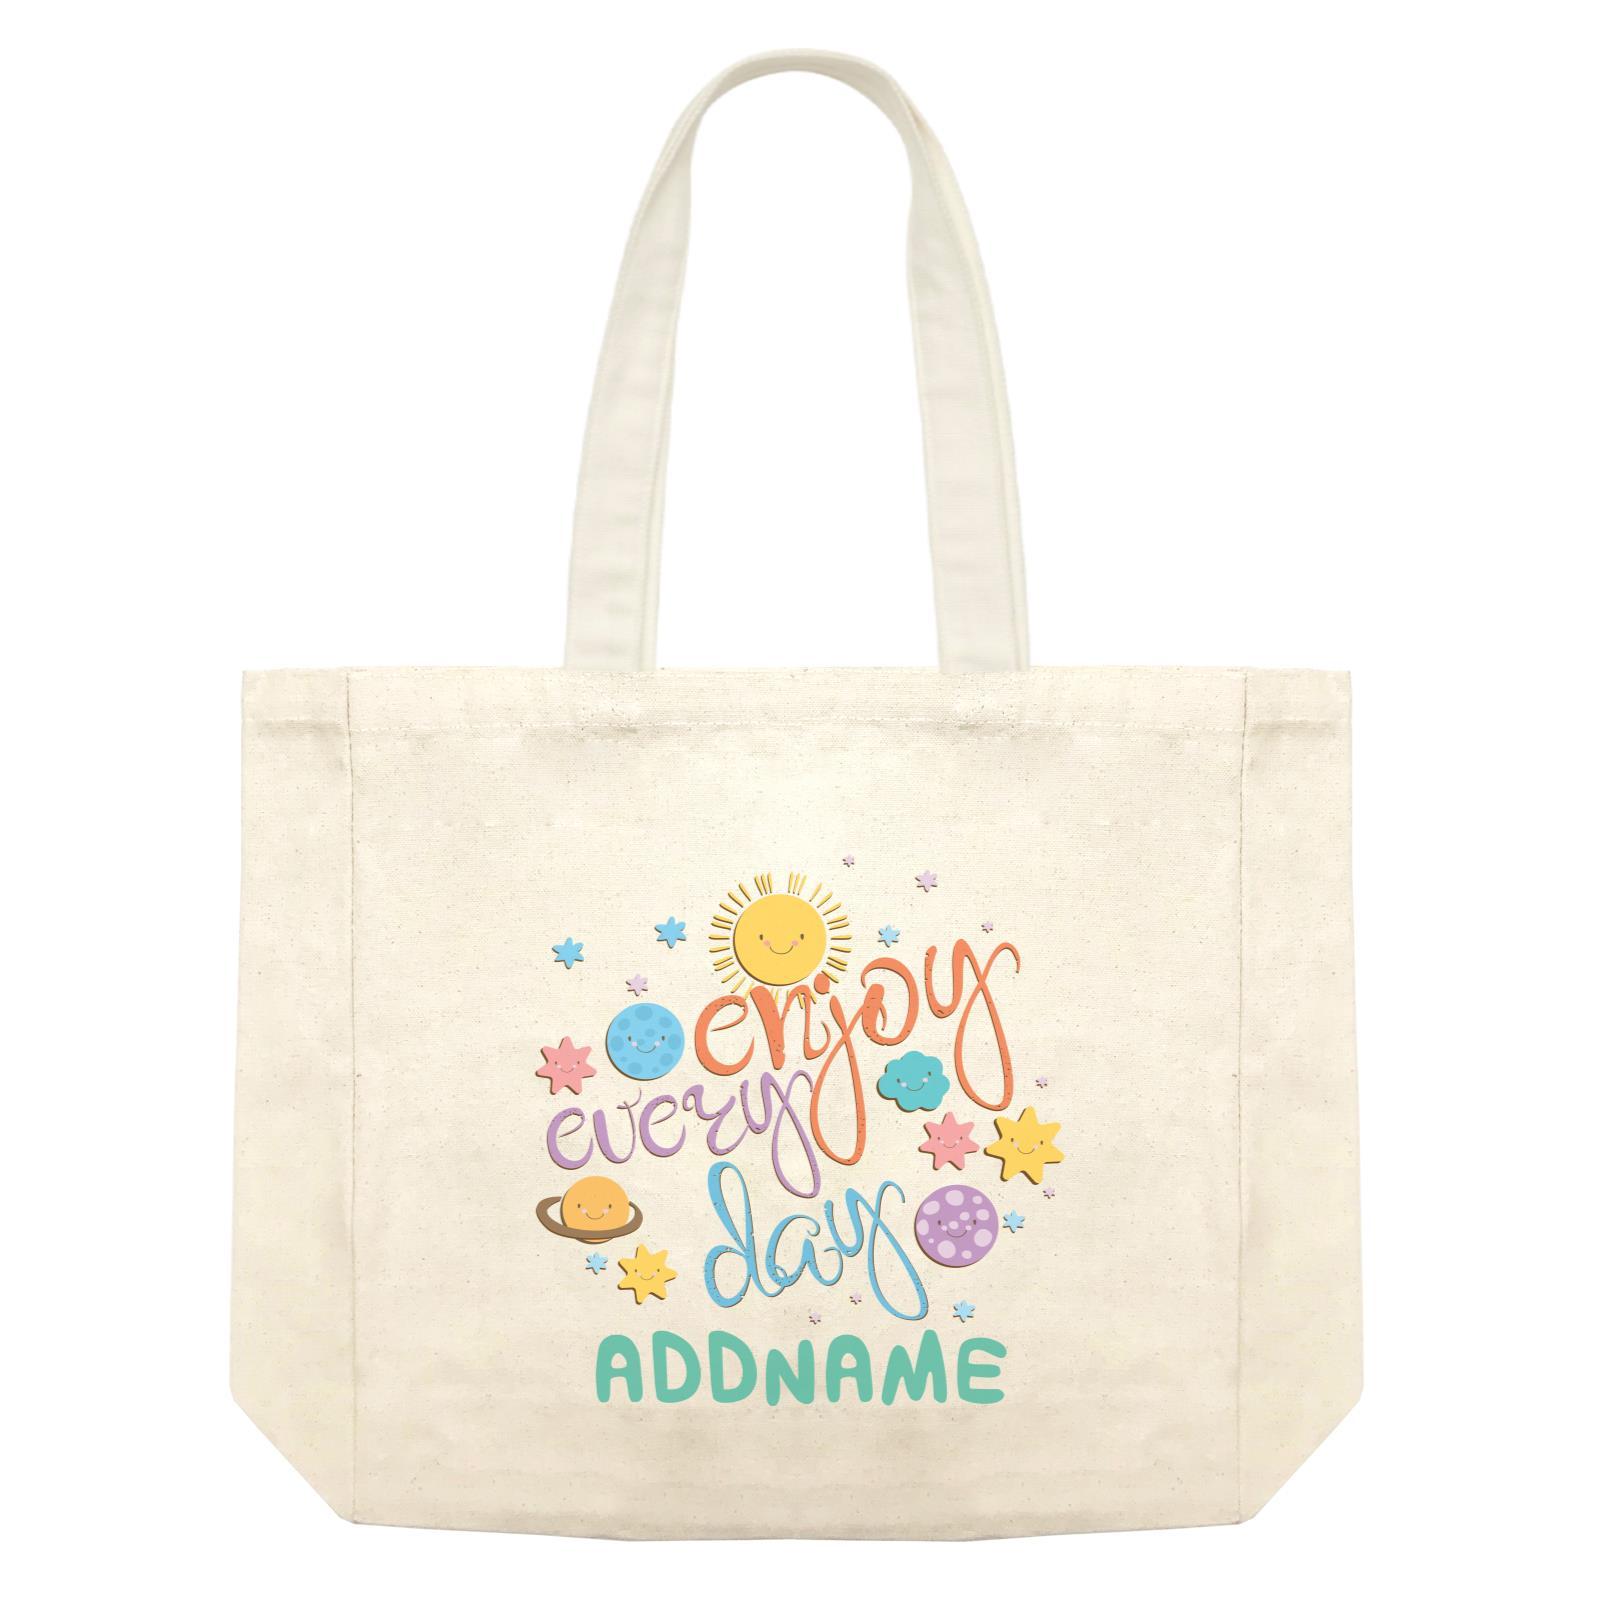 Children's Day Gift Series Enjoy Every Day Space Addname Shopping Bag